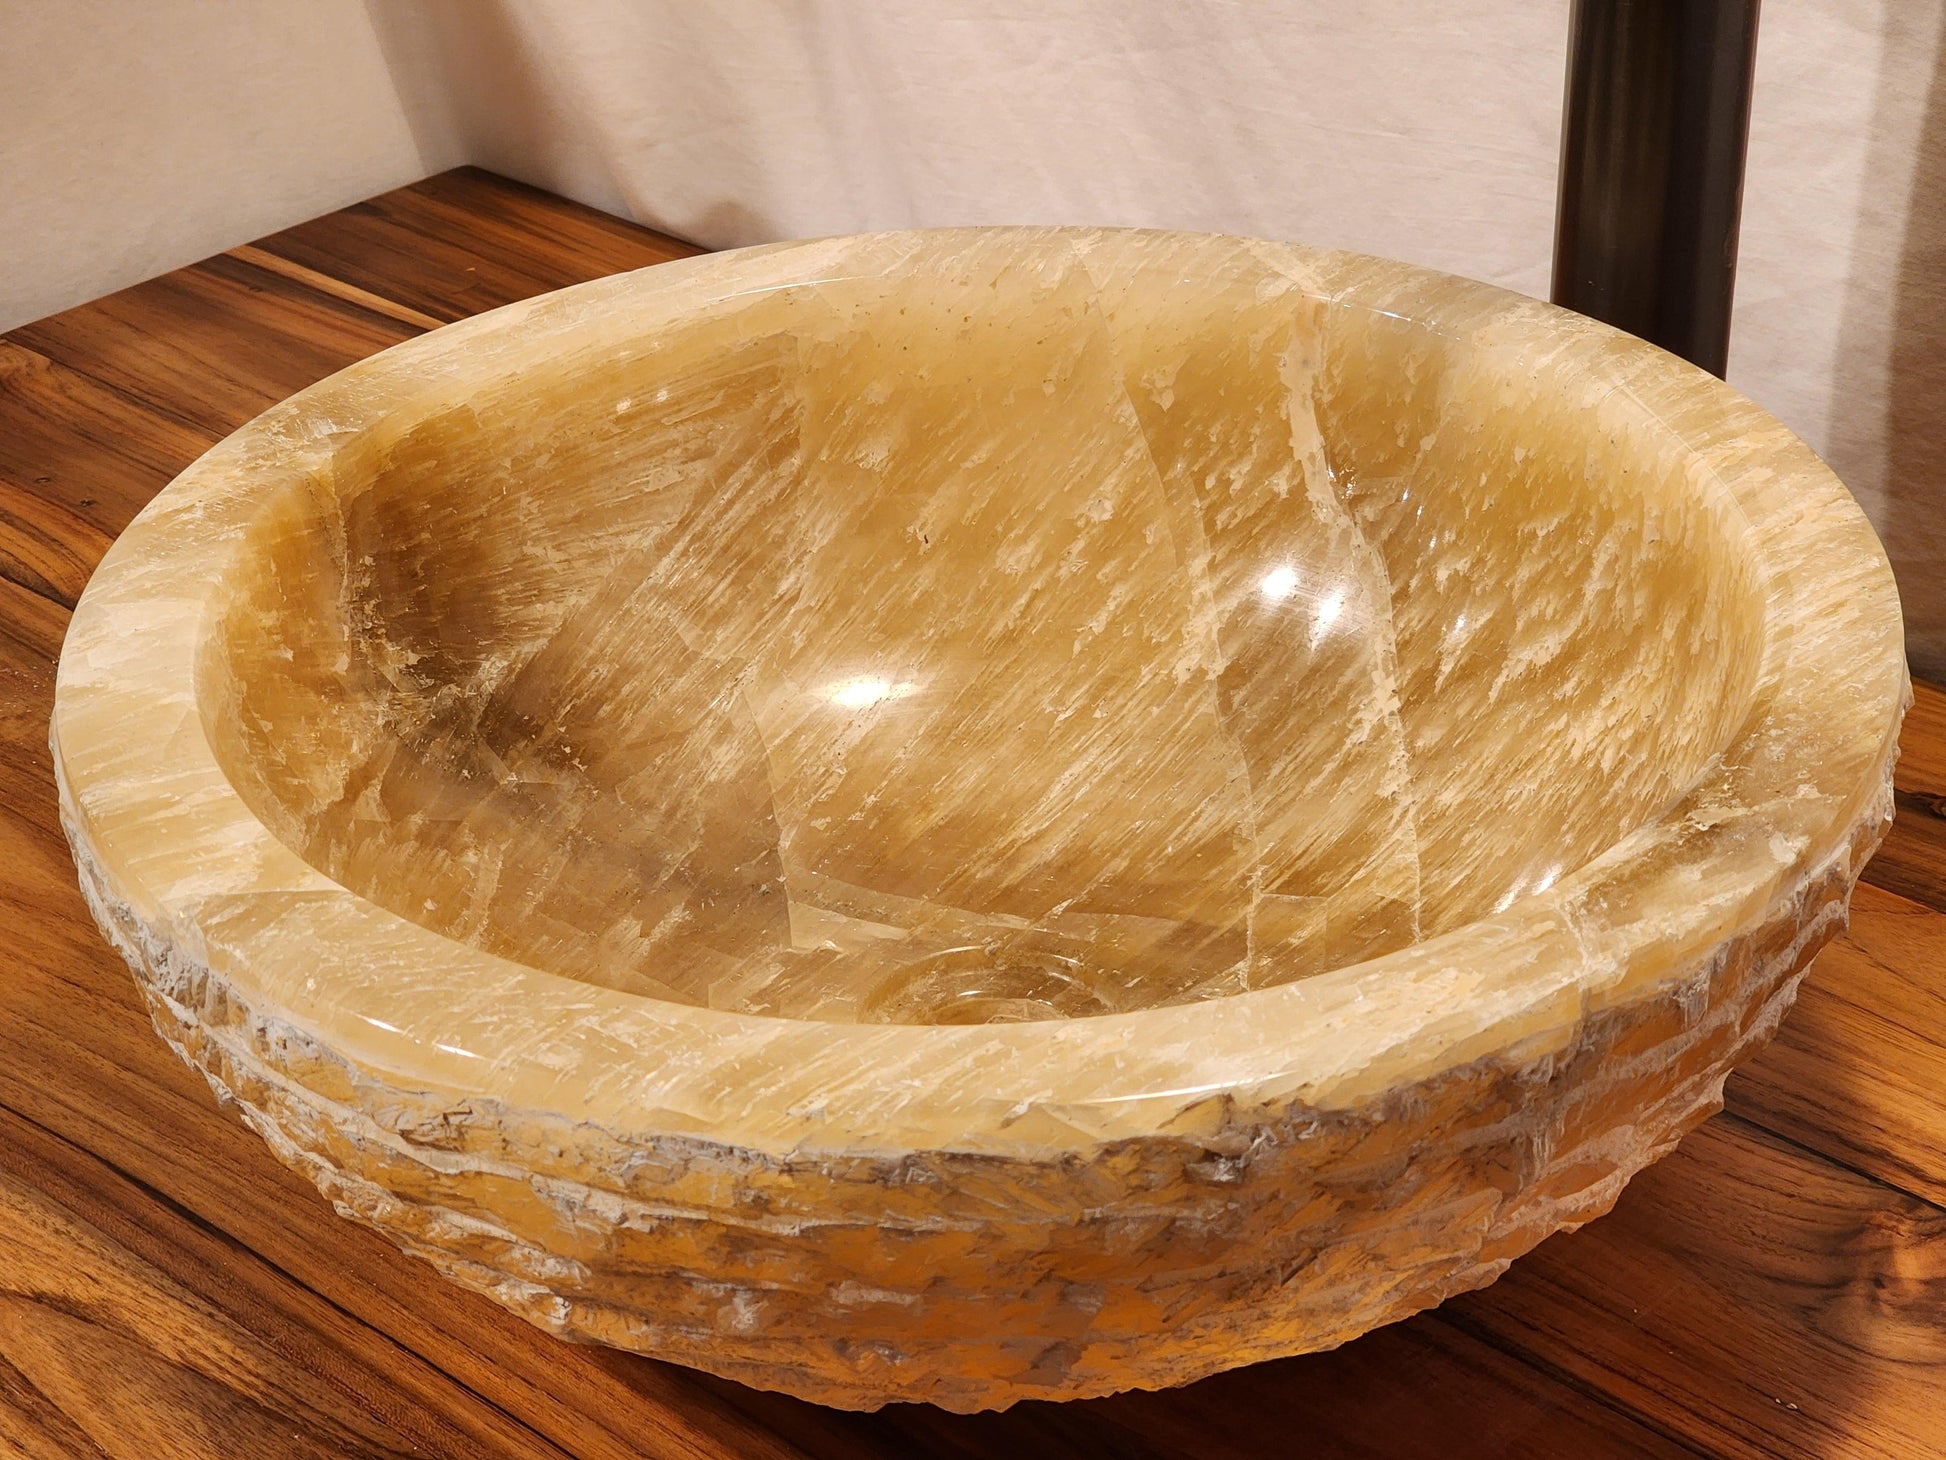 Mixed Honey Onyx With Chiseled Exterior Vessel Sink - MHOCE1 - Impact Imports